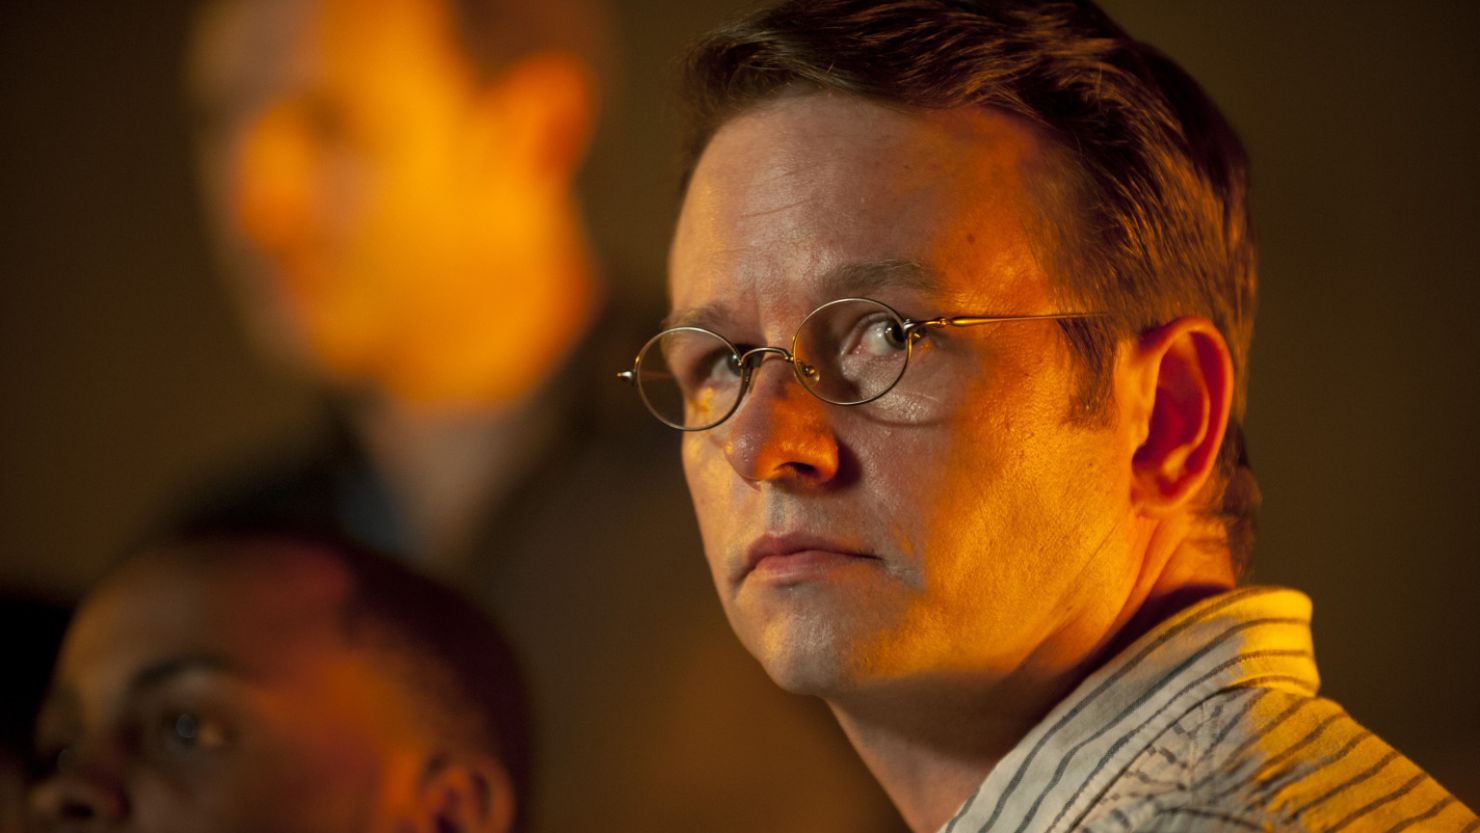 Before Sunday night, Dallas Roberts says he only told a few people about his character's fate.